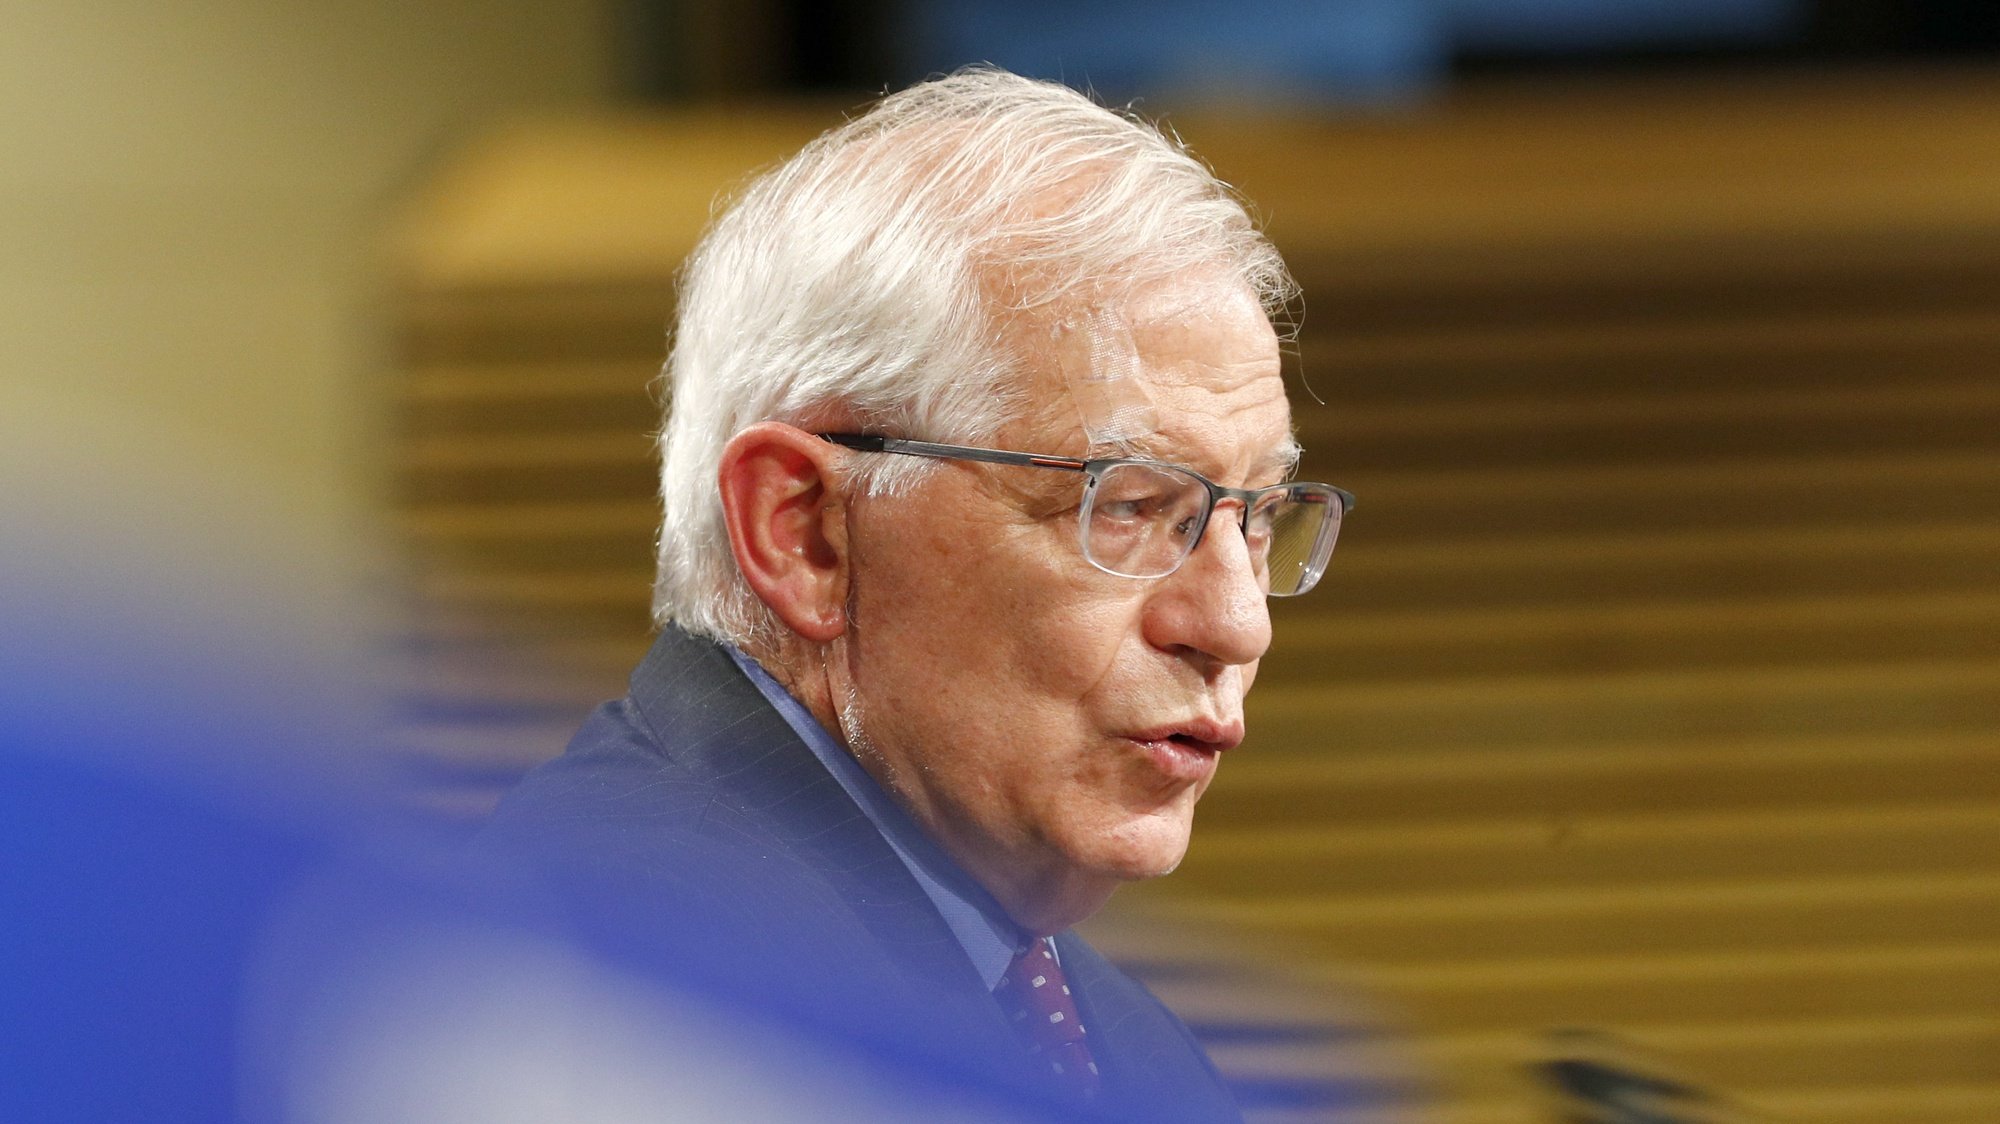 epa09275905 European High Representative of the Union for Foreign Affairs, Josep Borrell speaks during a news conference at the European Commission headquarters, in Brussels, Belgium, 16 June 2021.  EPA/JOHANNA GERON / POOL